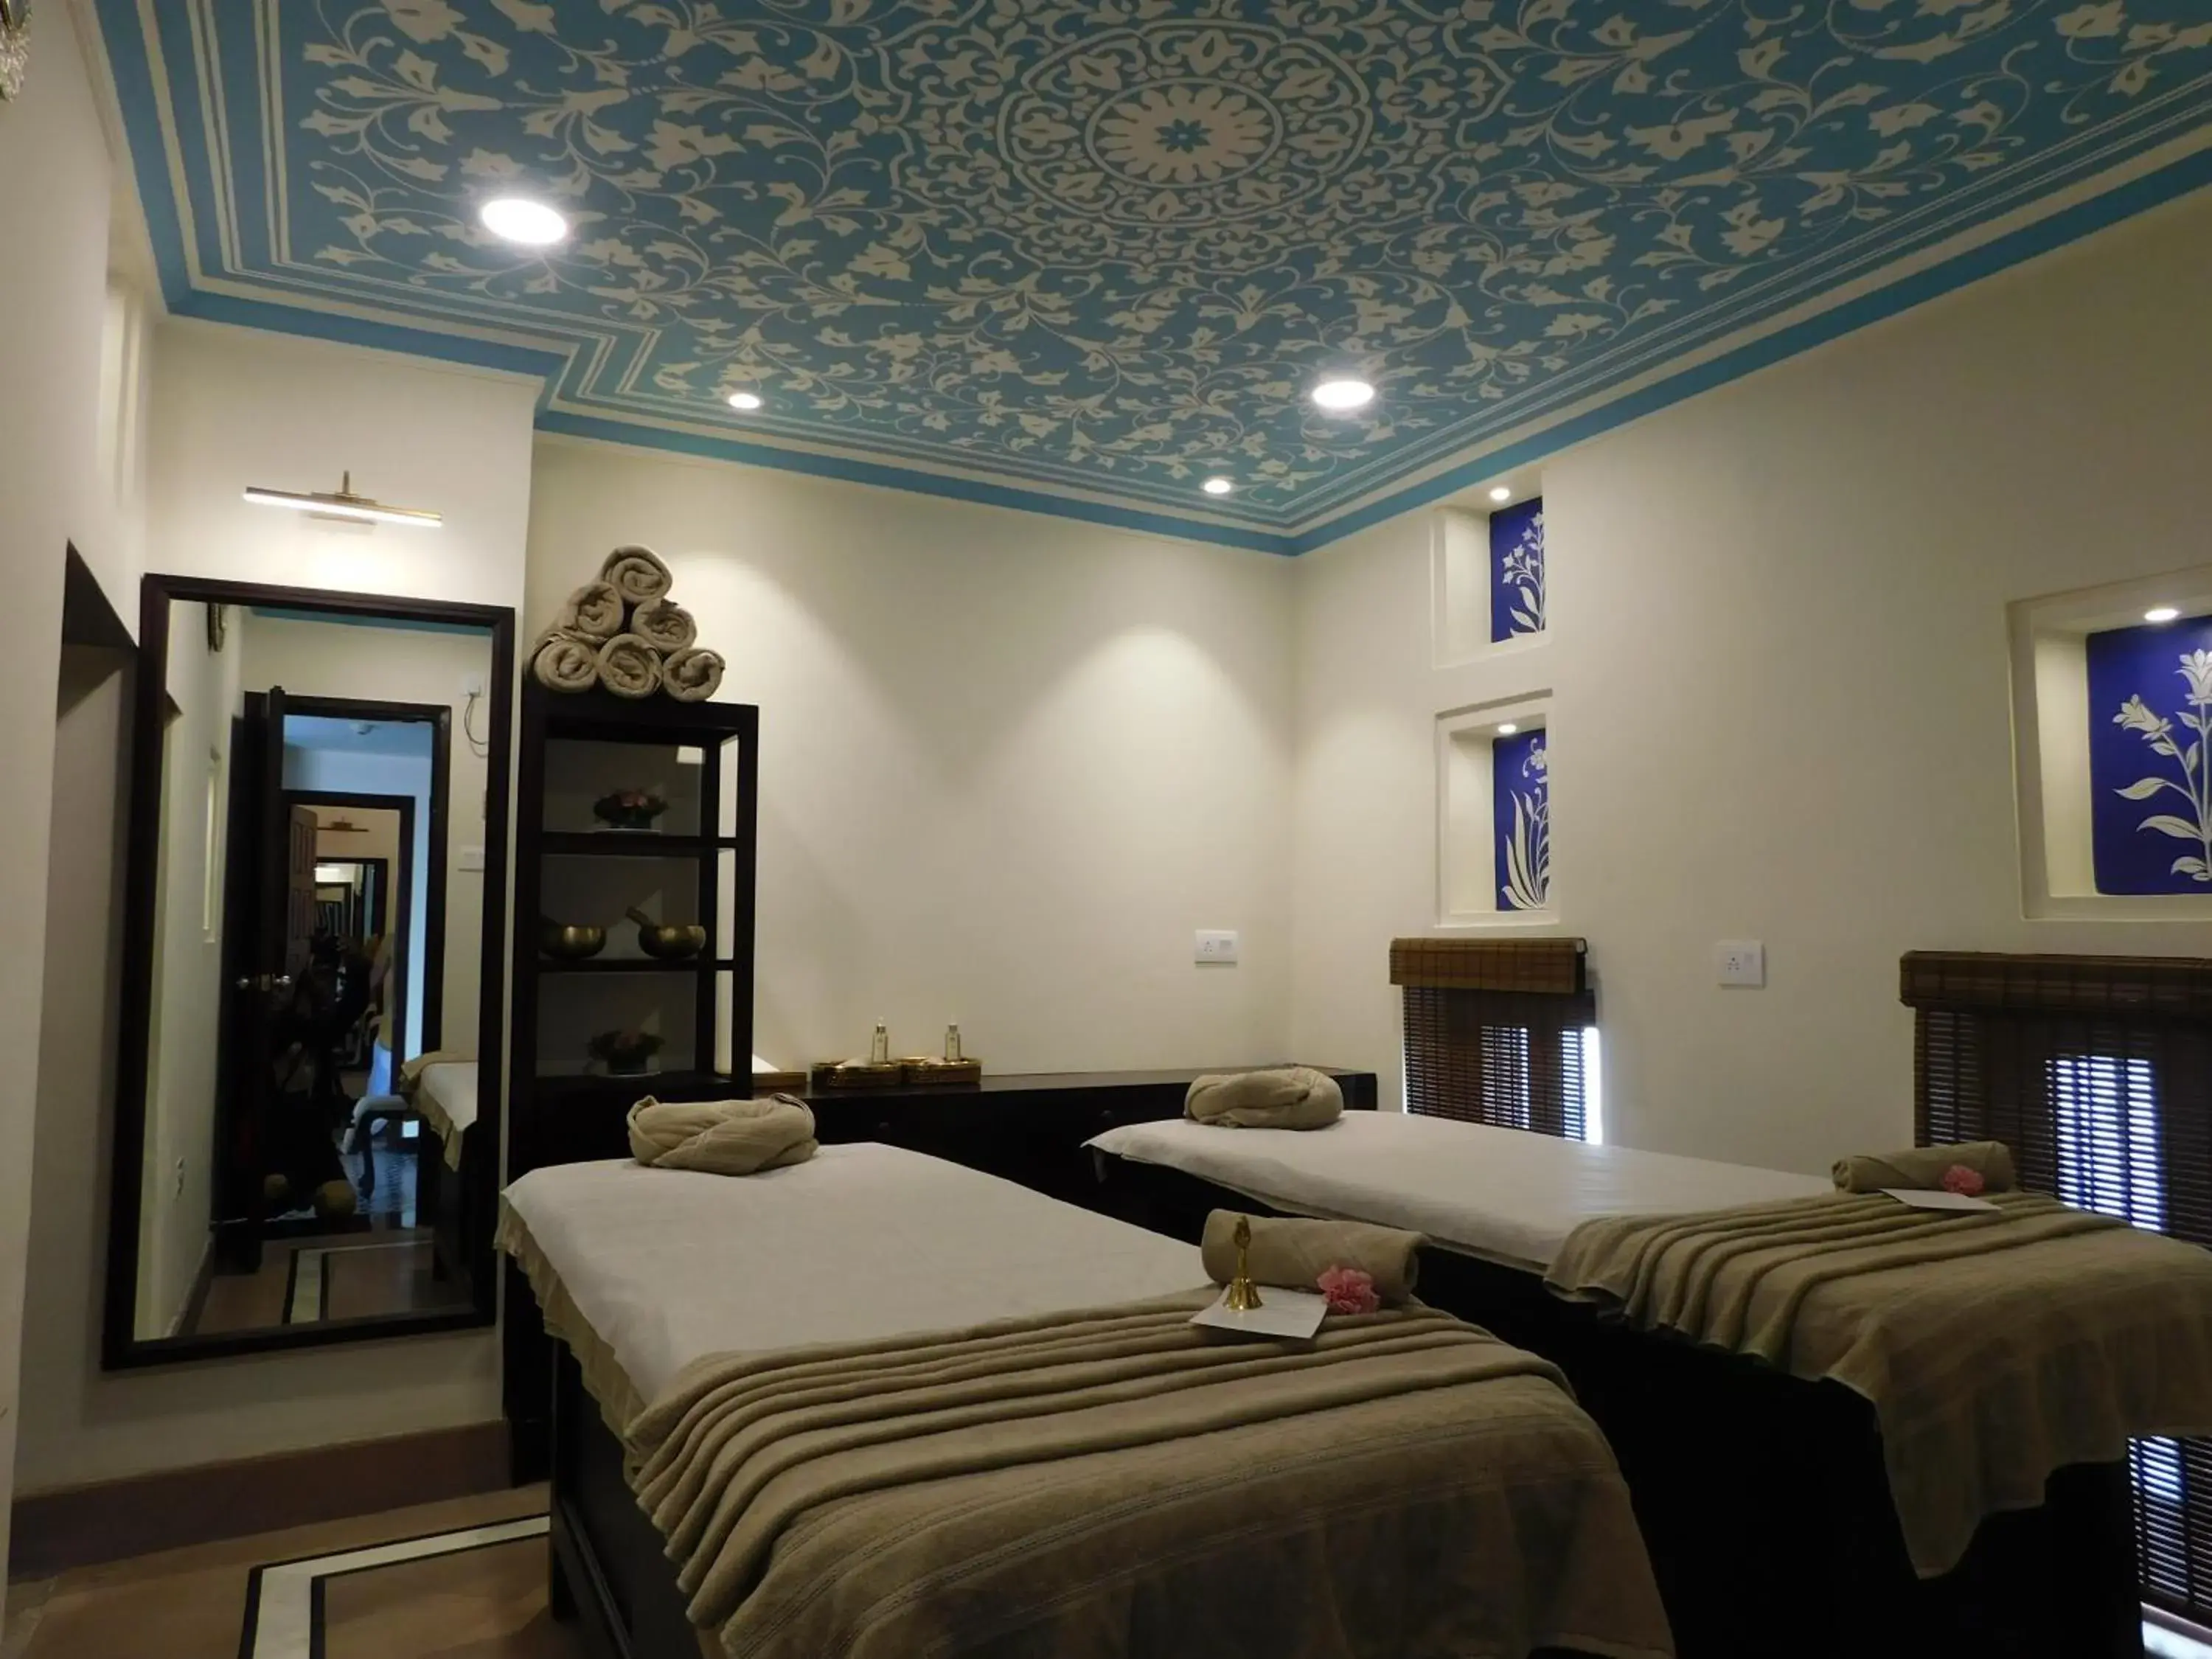 Spa and wellness centre/facilities in BrijRama Palace, Varanasi by the Ganges